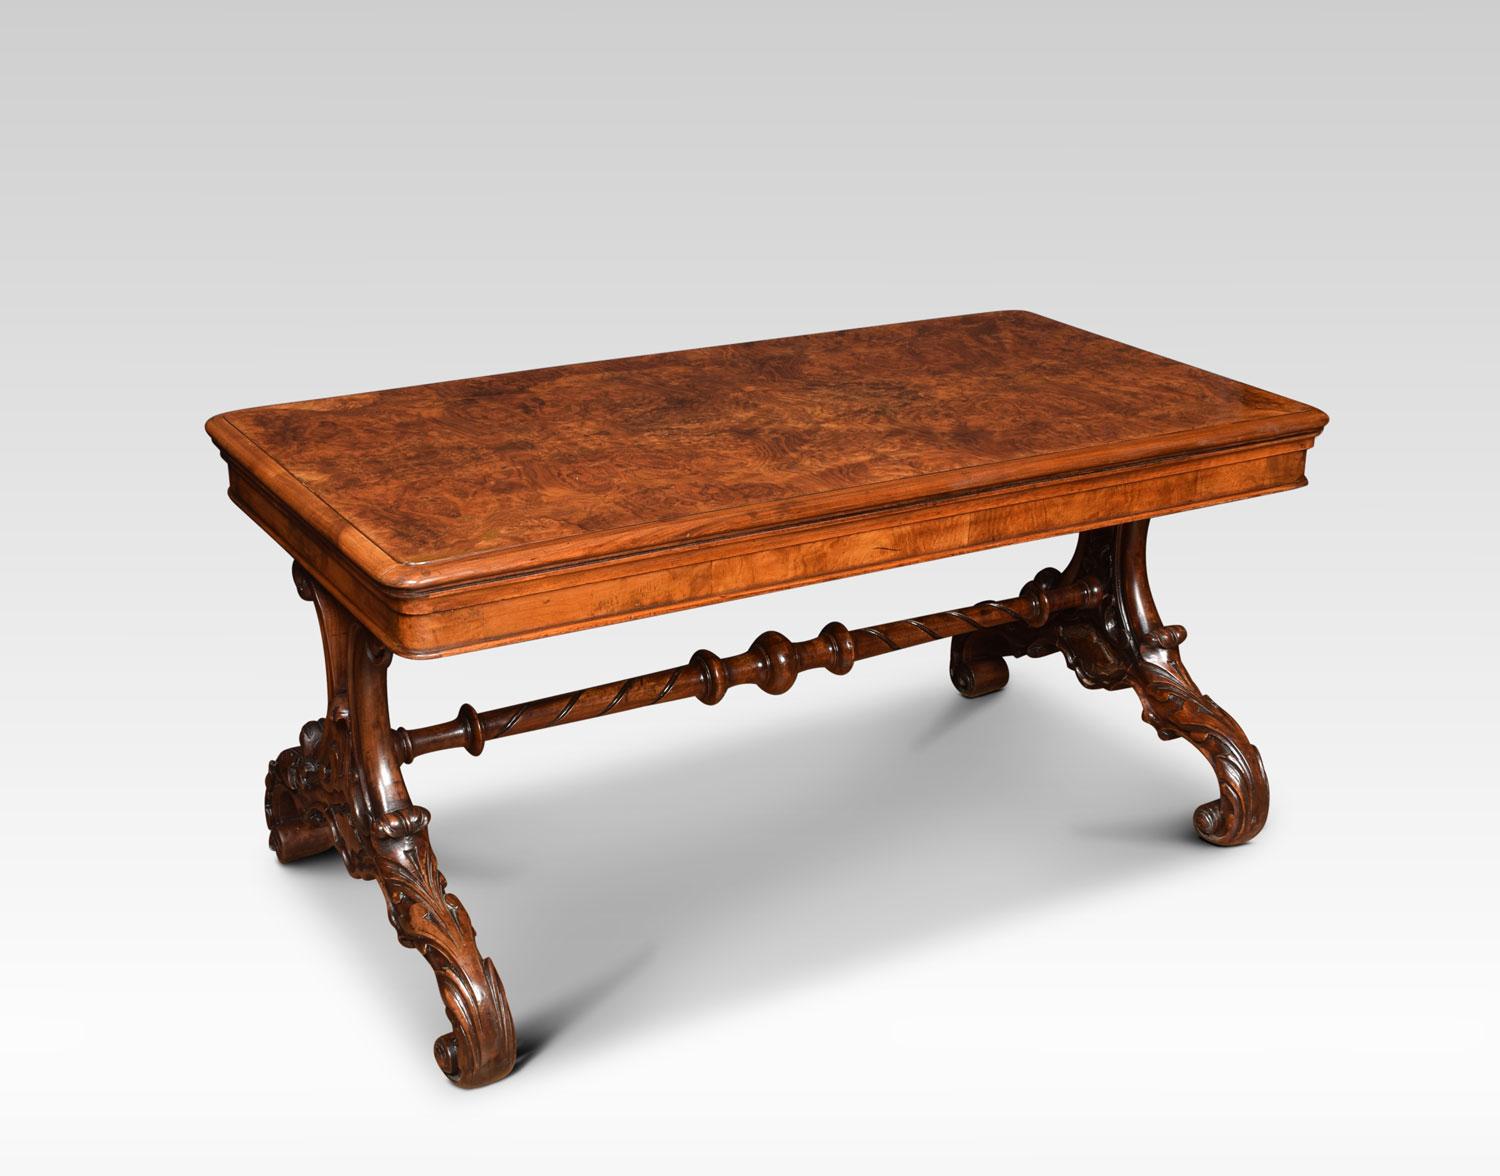 19th century coffee table, the large rectangular walnut top with moulded edge. Raised up on carved platform ends united by stretcher. Terminating in splayed scroll legs. (Adapted).
Dimensions:
Height 20.5 inches
Width 42 inches
Depth 22 inches.